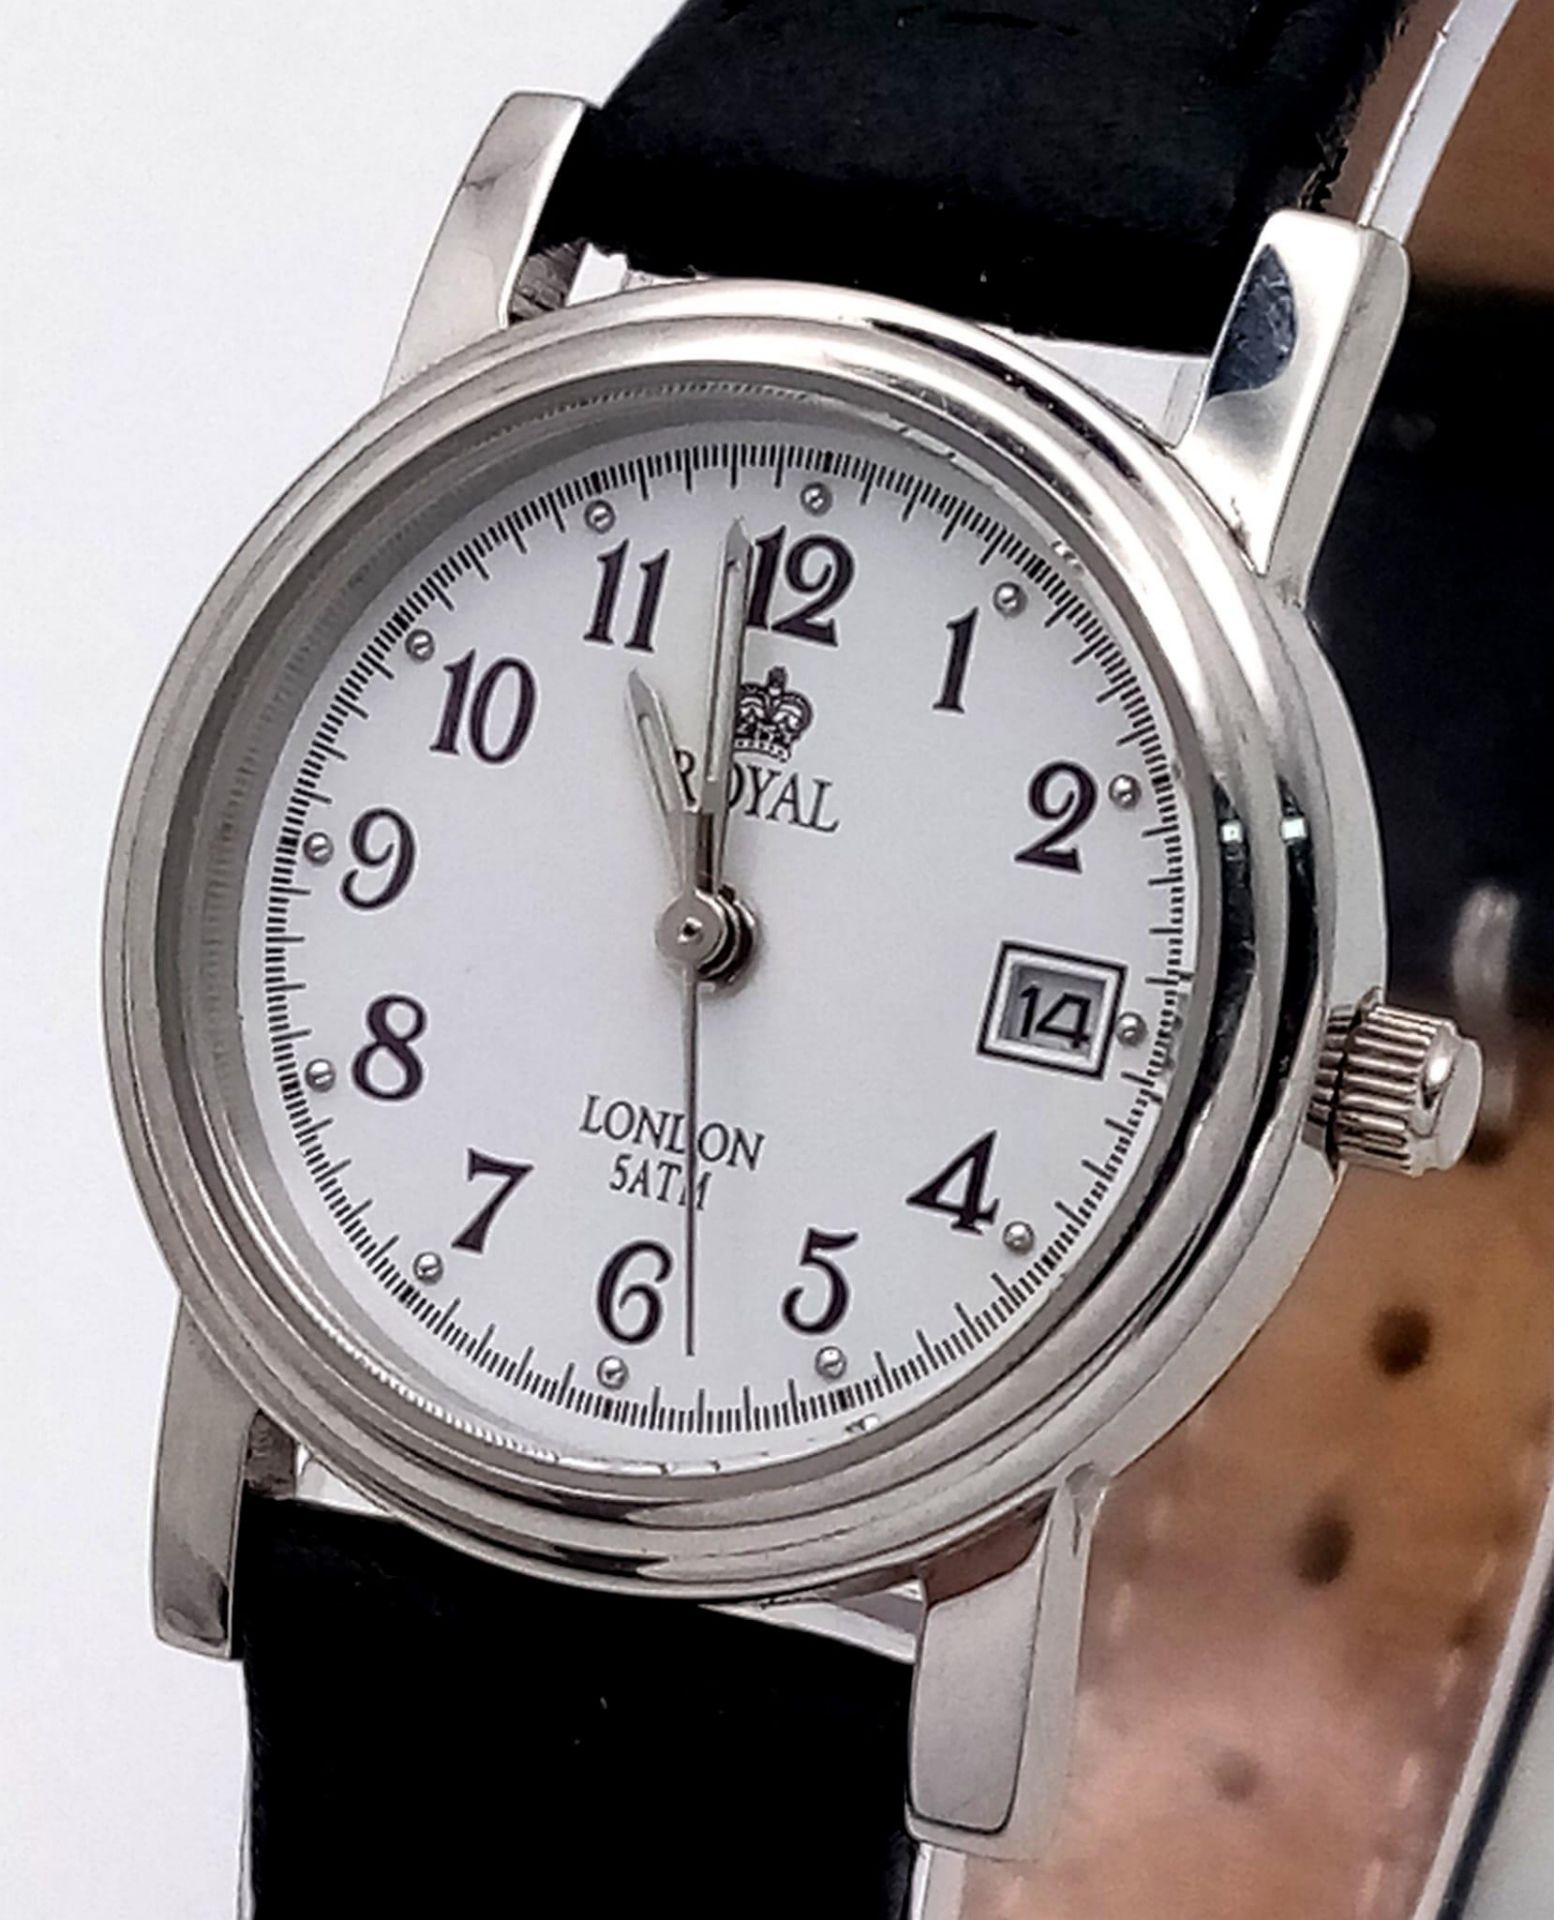 A Ladies Royal London Quartz Watch. Black leather strap. Stainless steel case - 25mm. White dial - Image 4 of 7